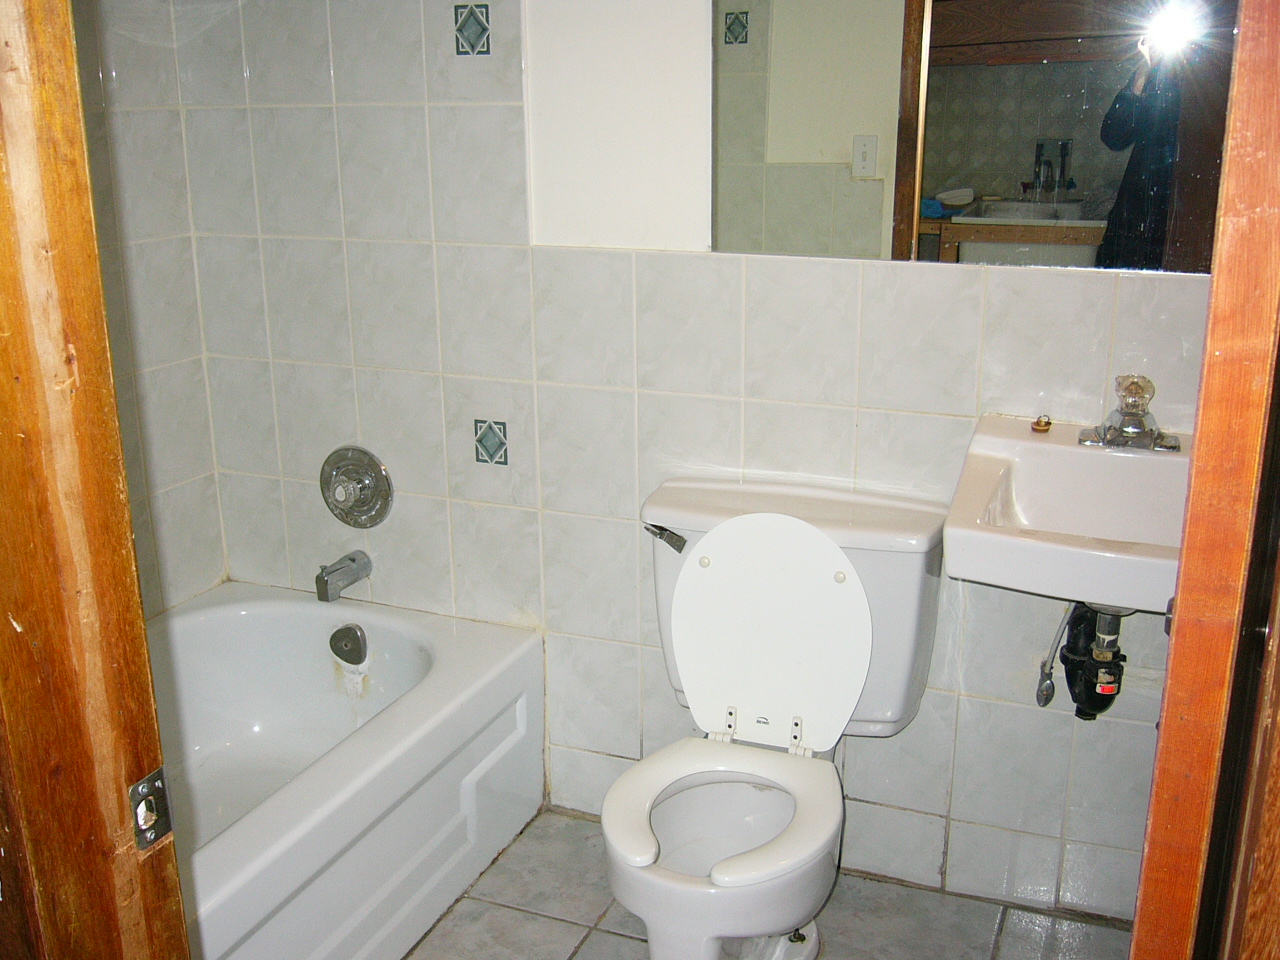 a bathroom with white tiled walls and floors